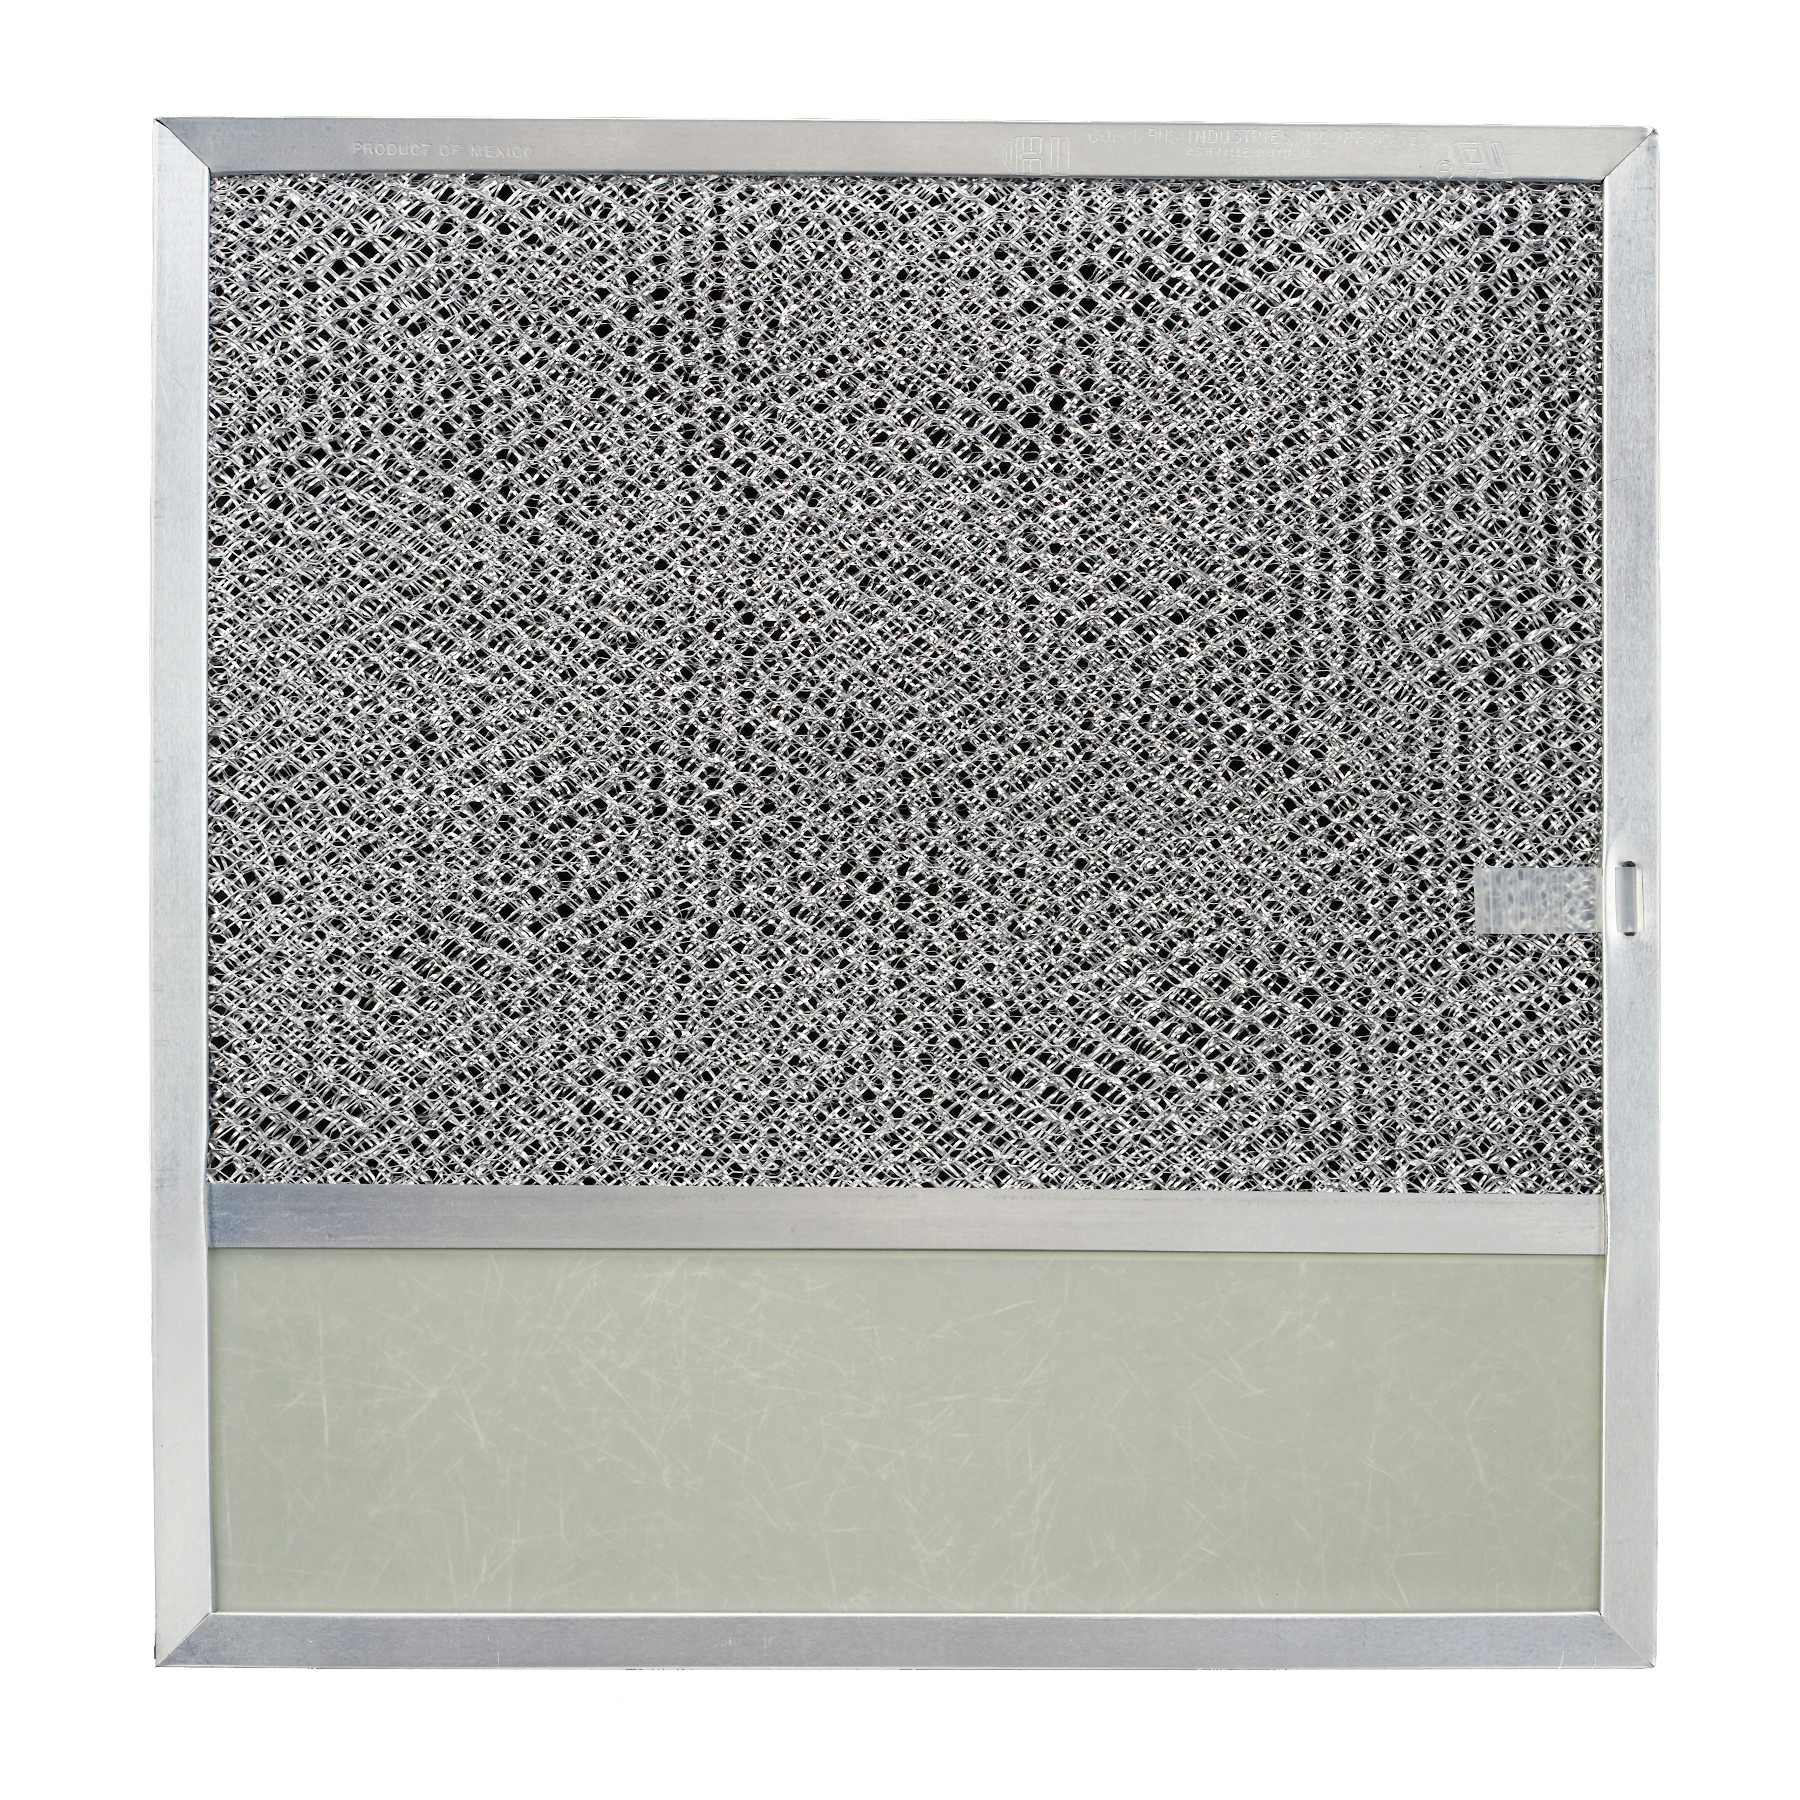 Aluminum Filter with Light Lens, 11-3/8-Inch x 11-3/4-Inch